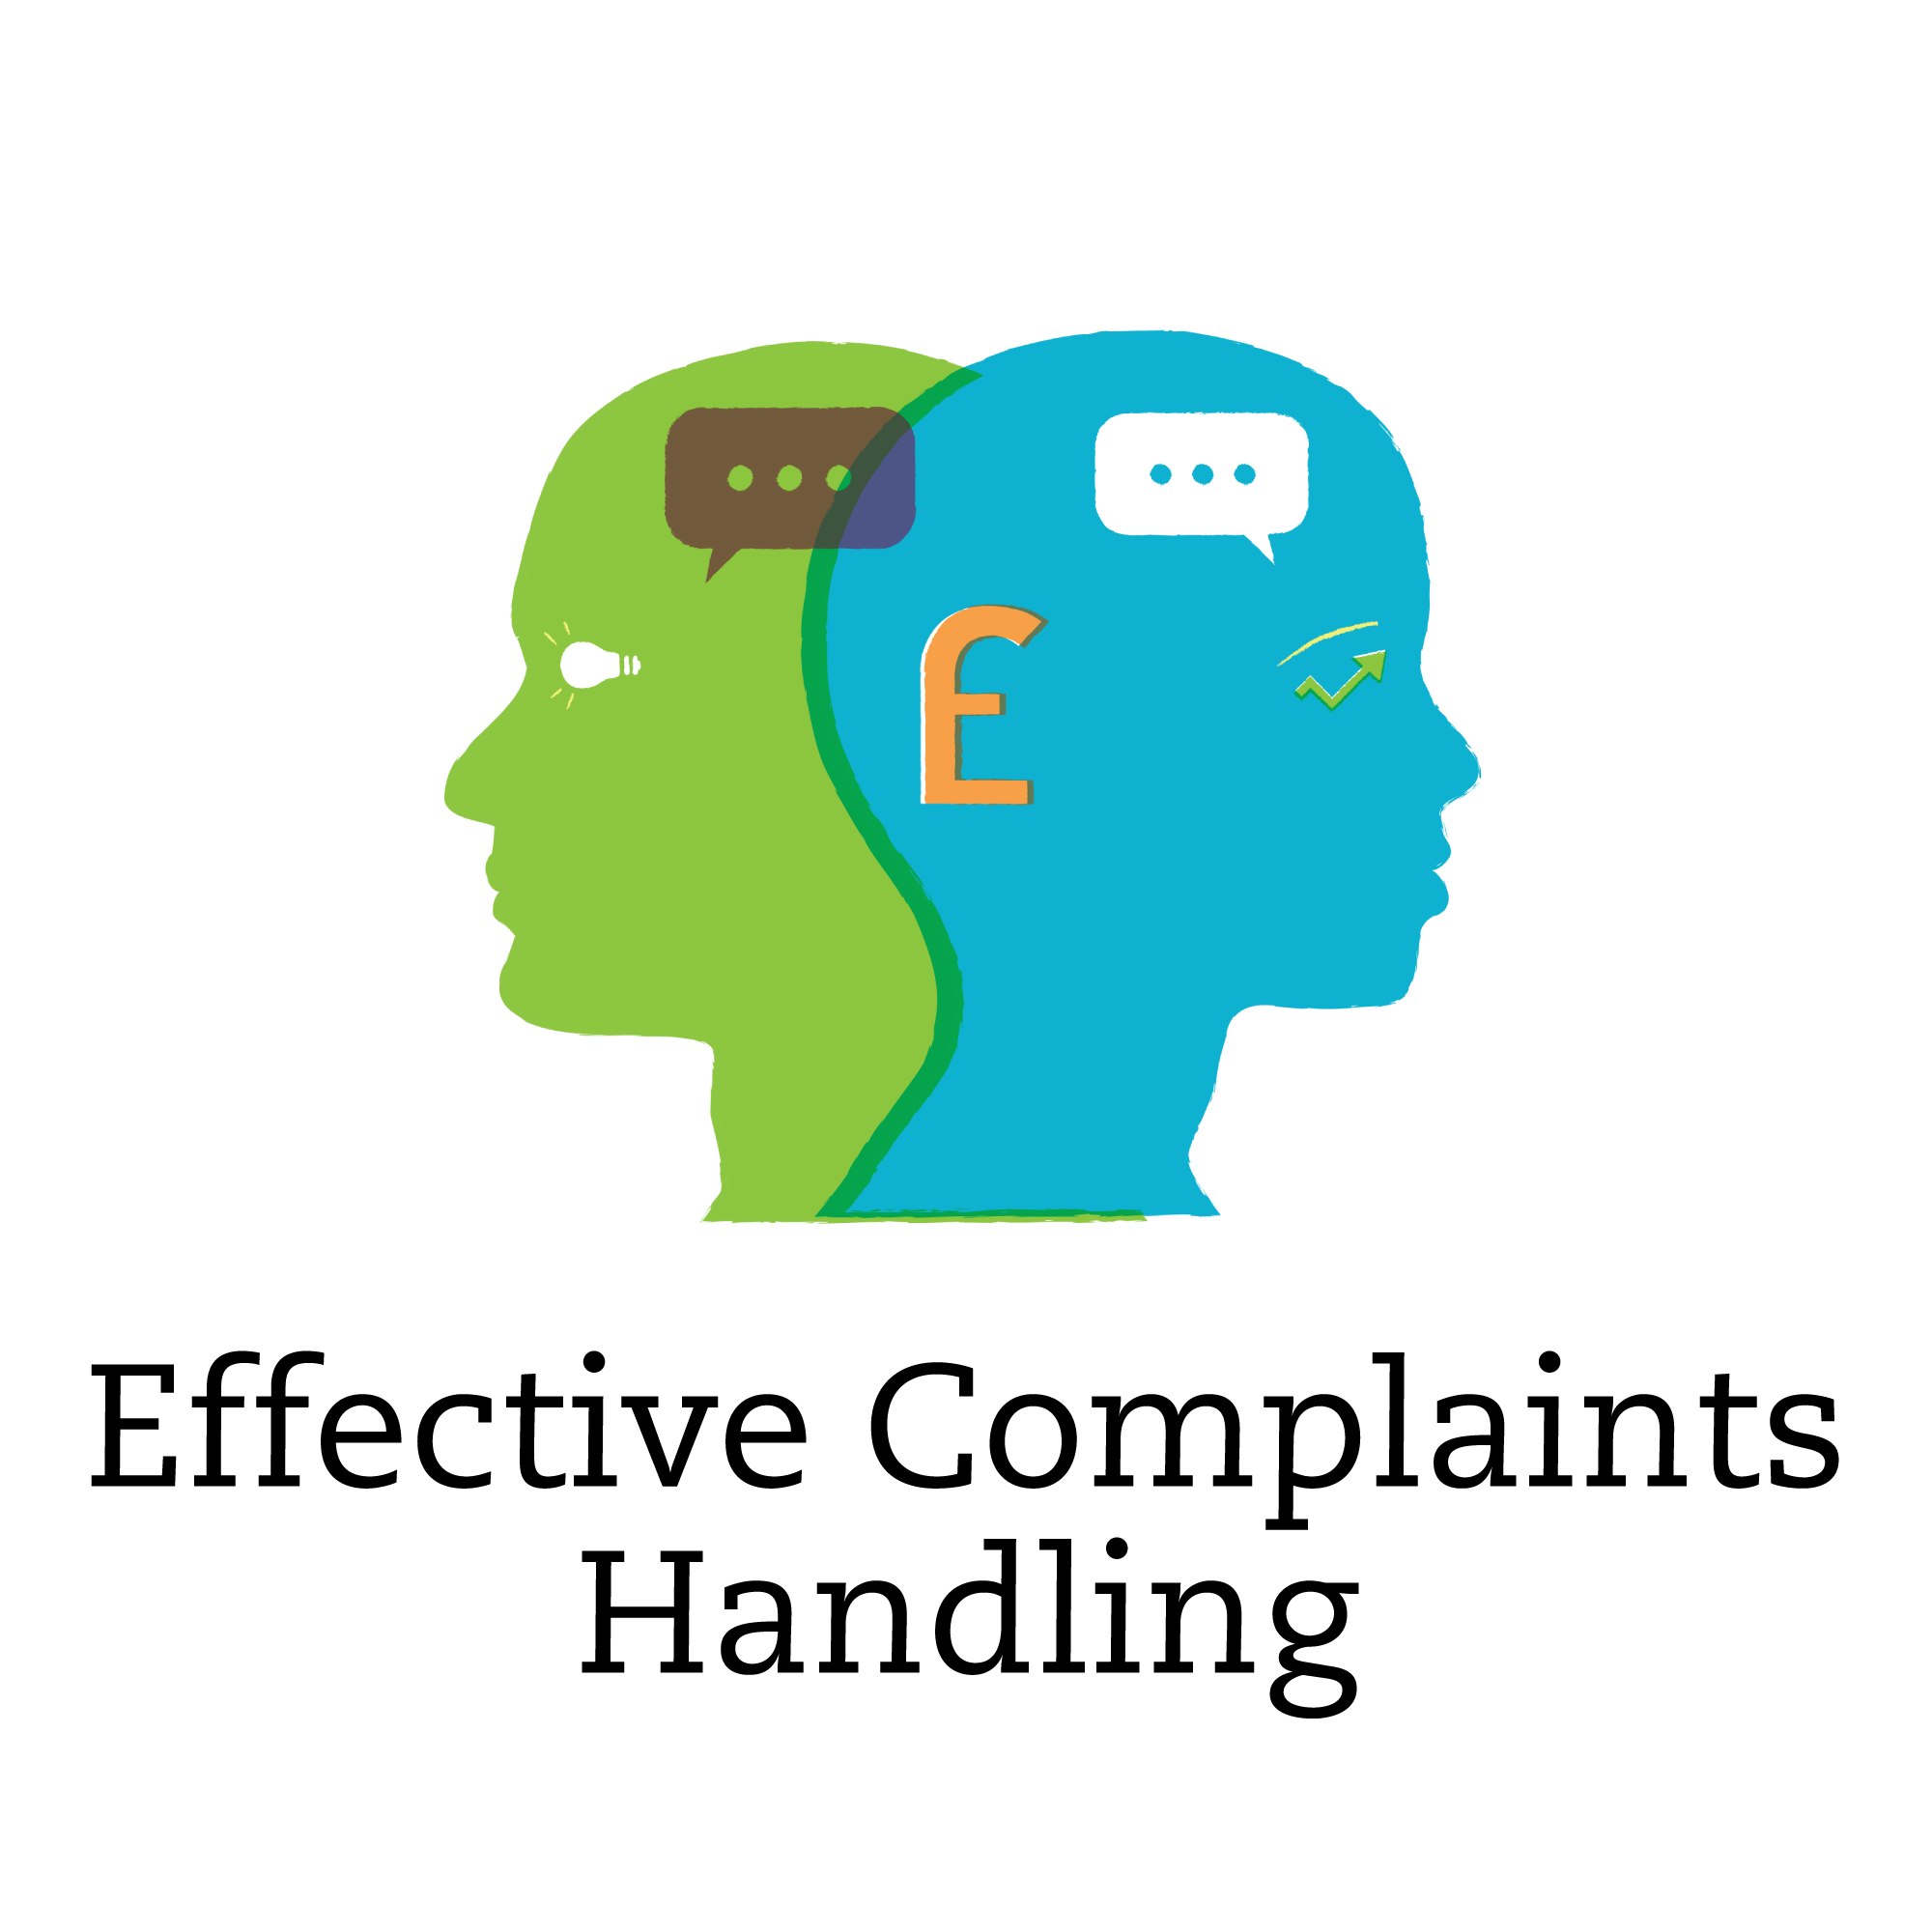 Effective complaints handling – turning complaints into customer insight (3 Feb)